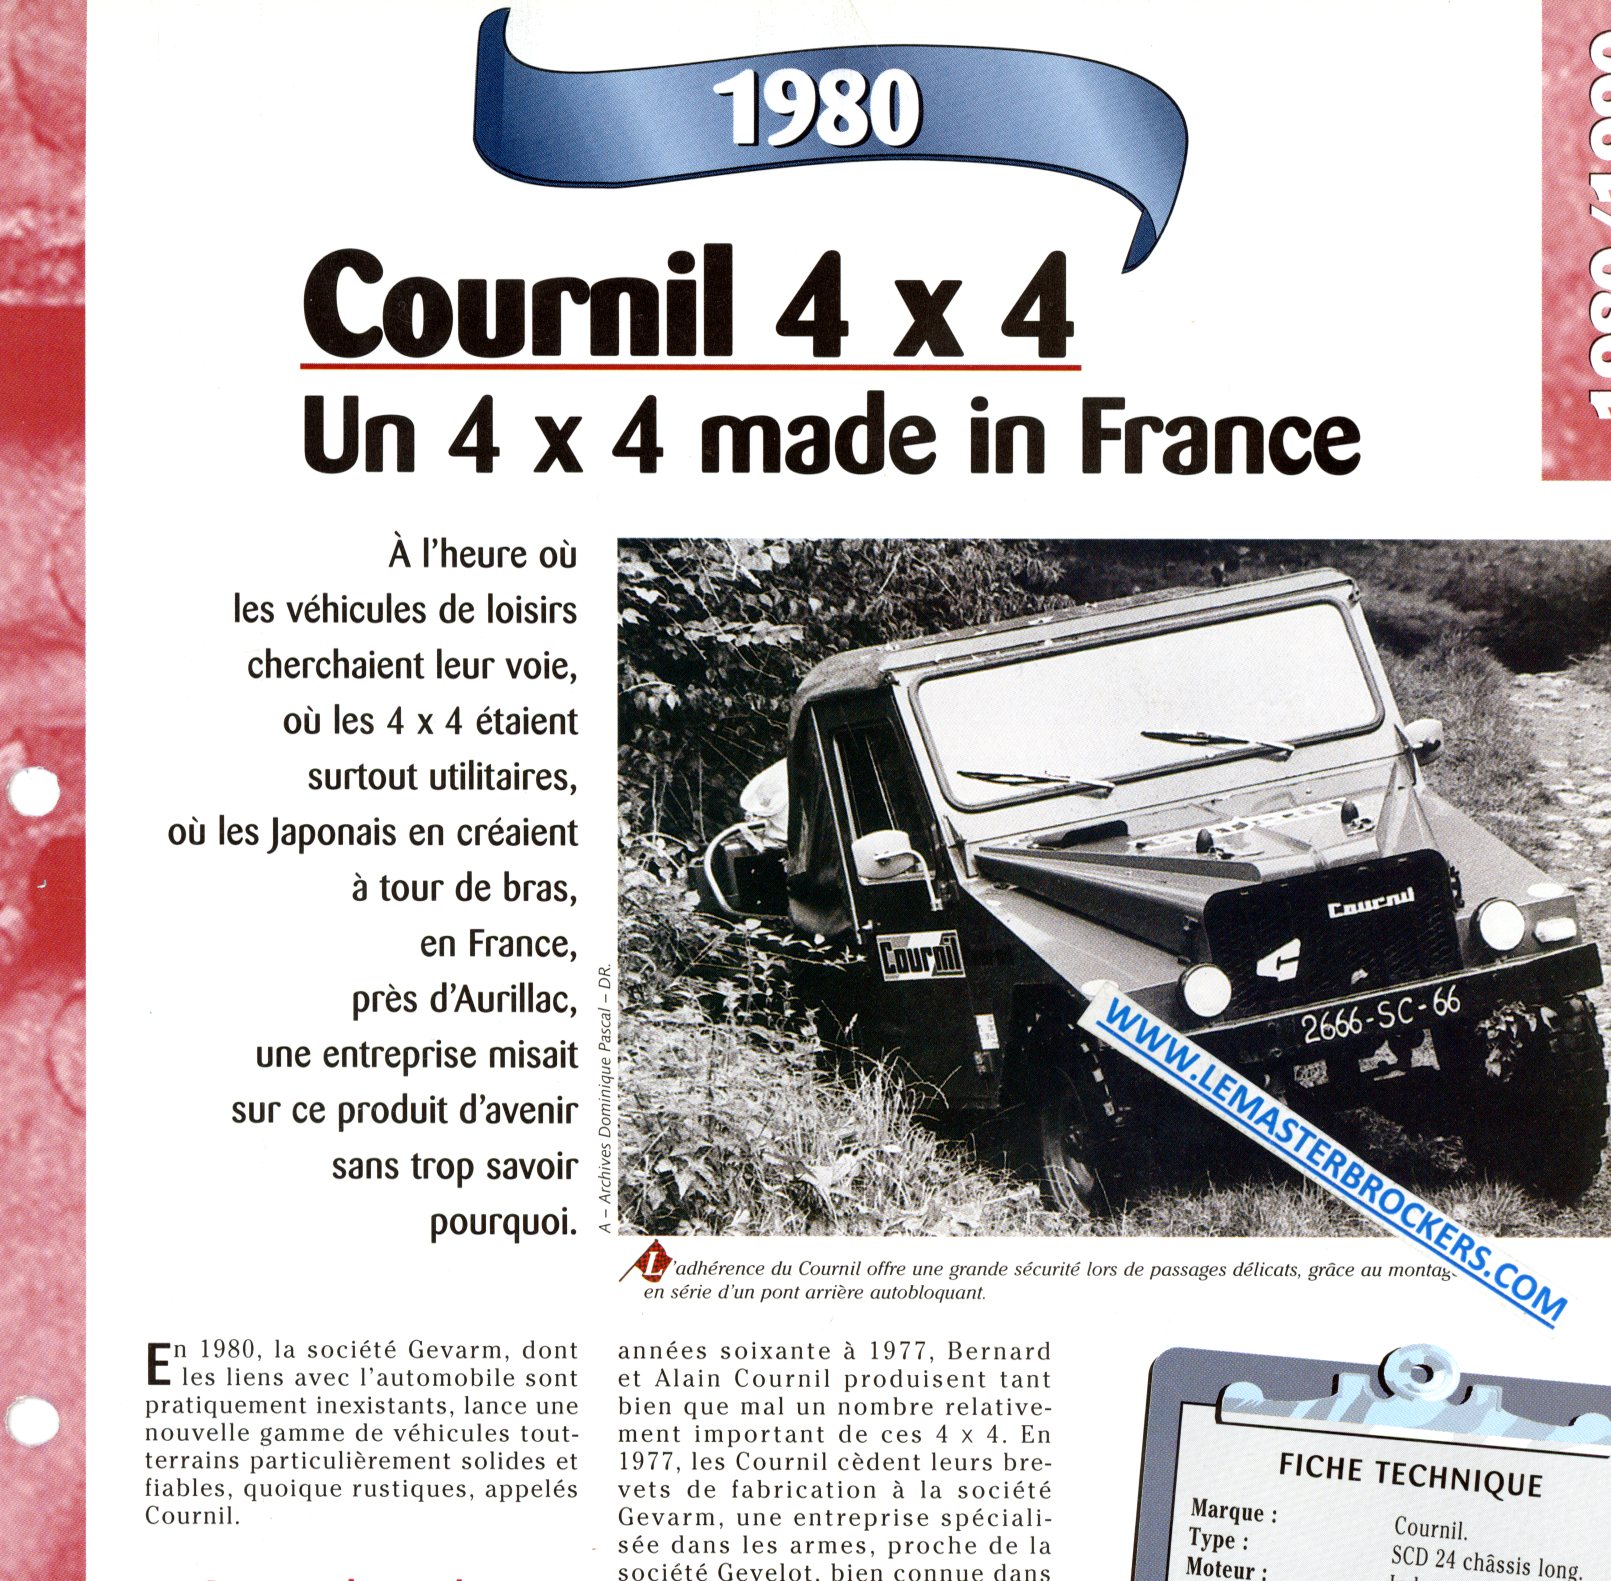 COURNIL 4X4 MADE IN FRANCE - FICHE AUTO SDC 24 CHASSIS LONG COURNIL